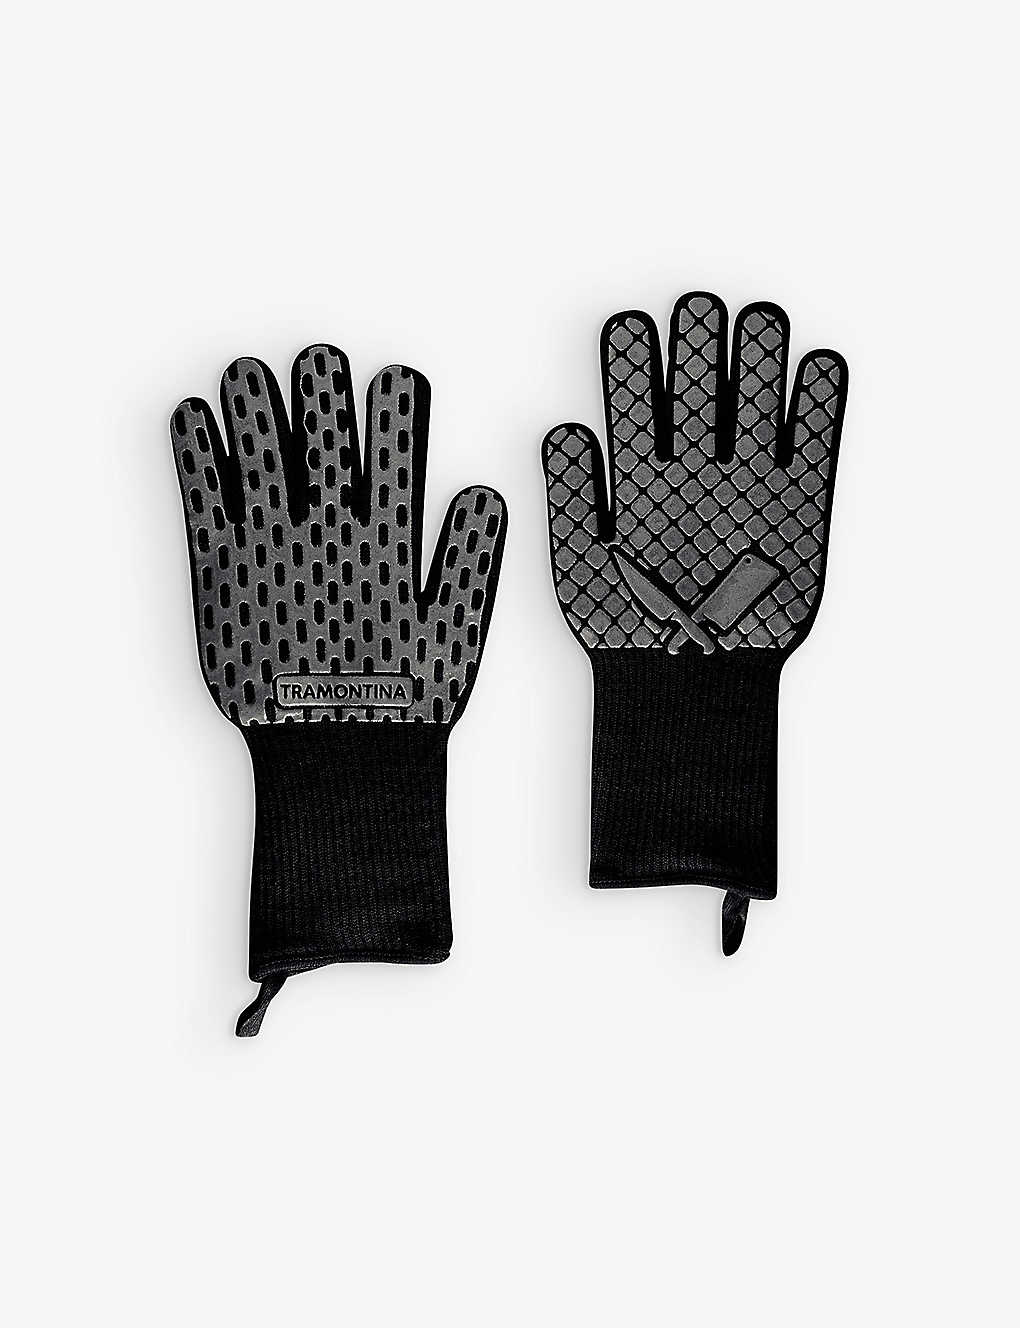 TRAMONTINA バーベキュー ヒートプロテクティブ グローブ Barbeque heat-protective gloves